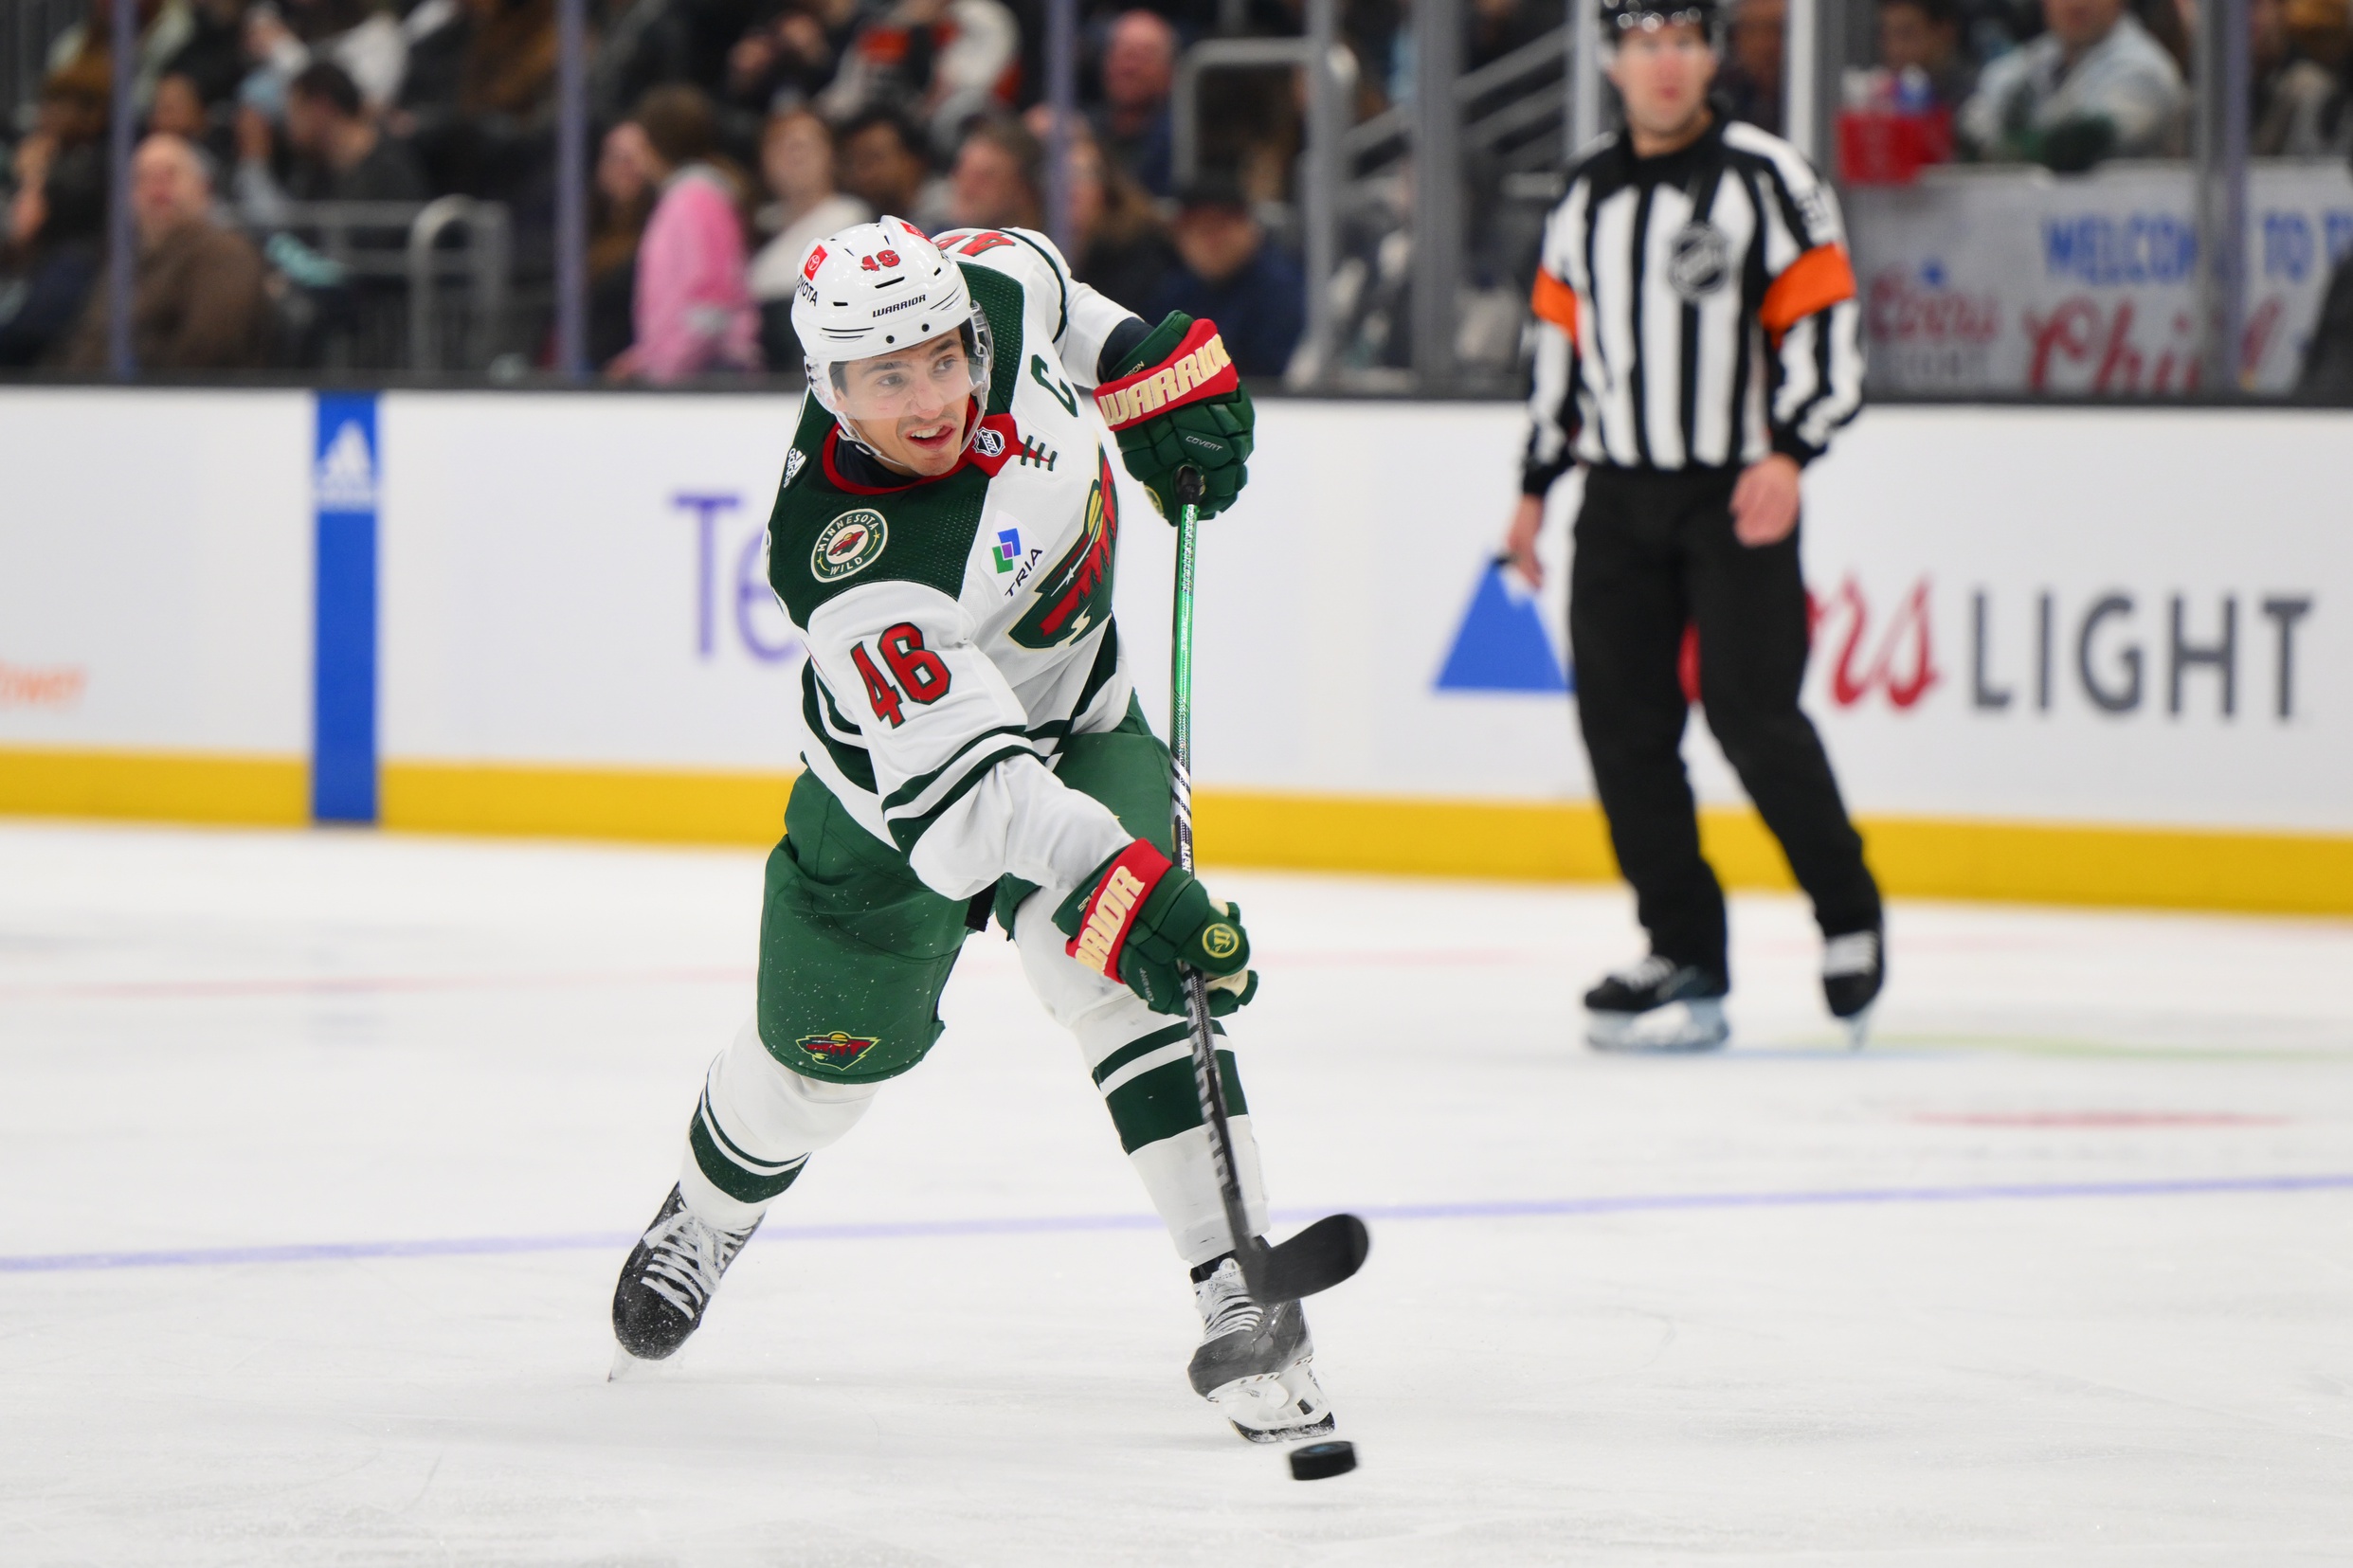 Minnesota Wild’s Jared Spurgeon Could be Traded to 4 Contenders to Free Cap Space